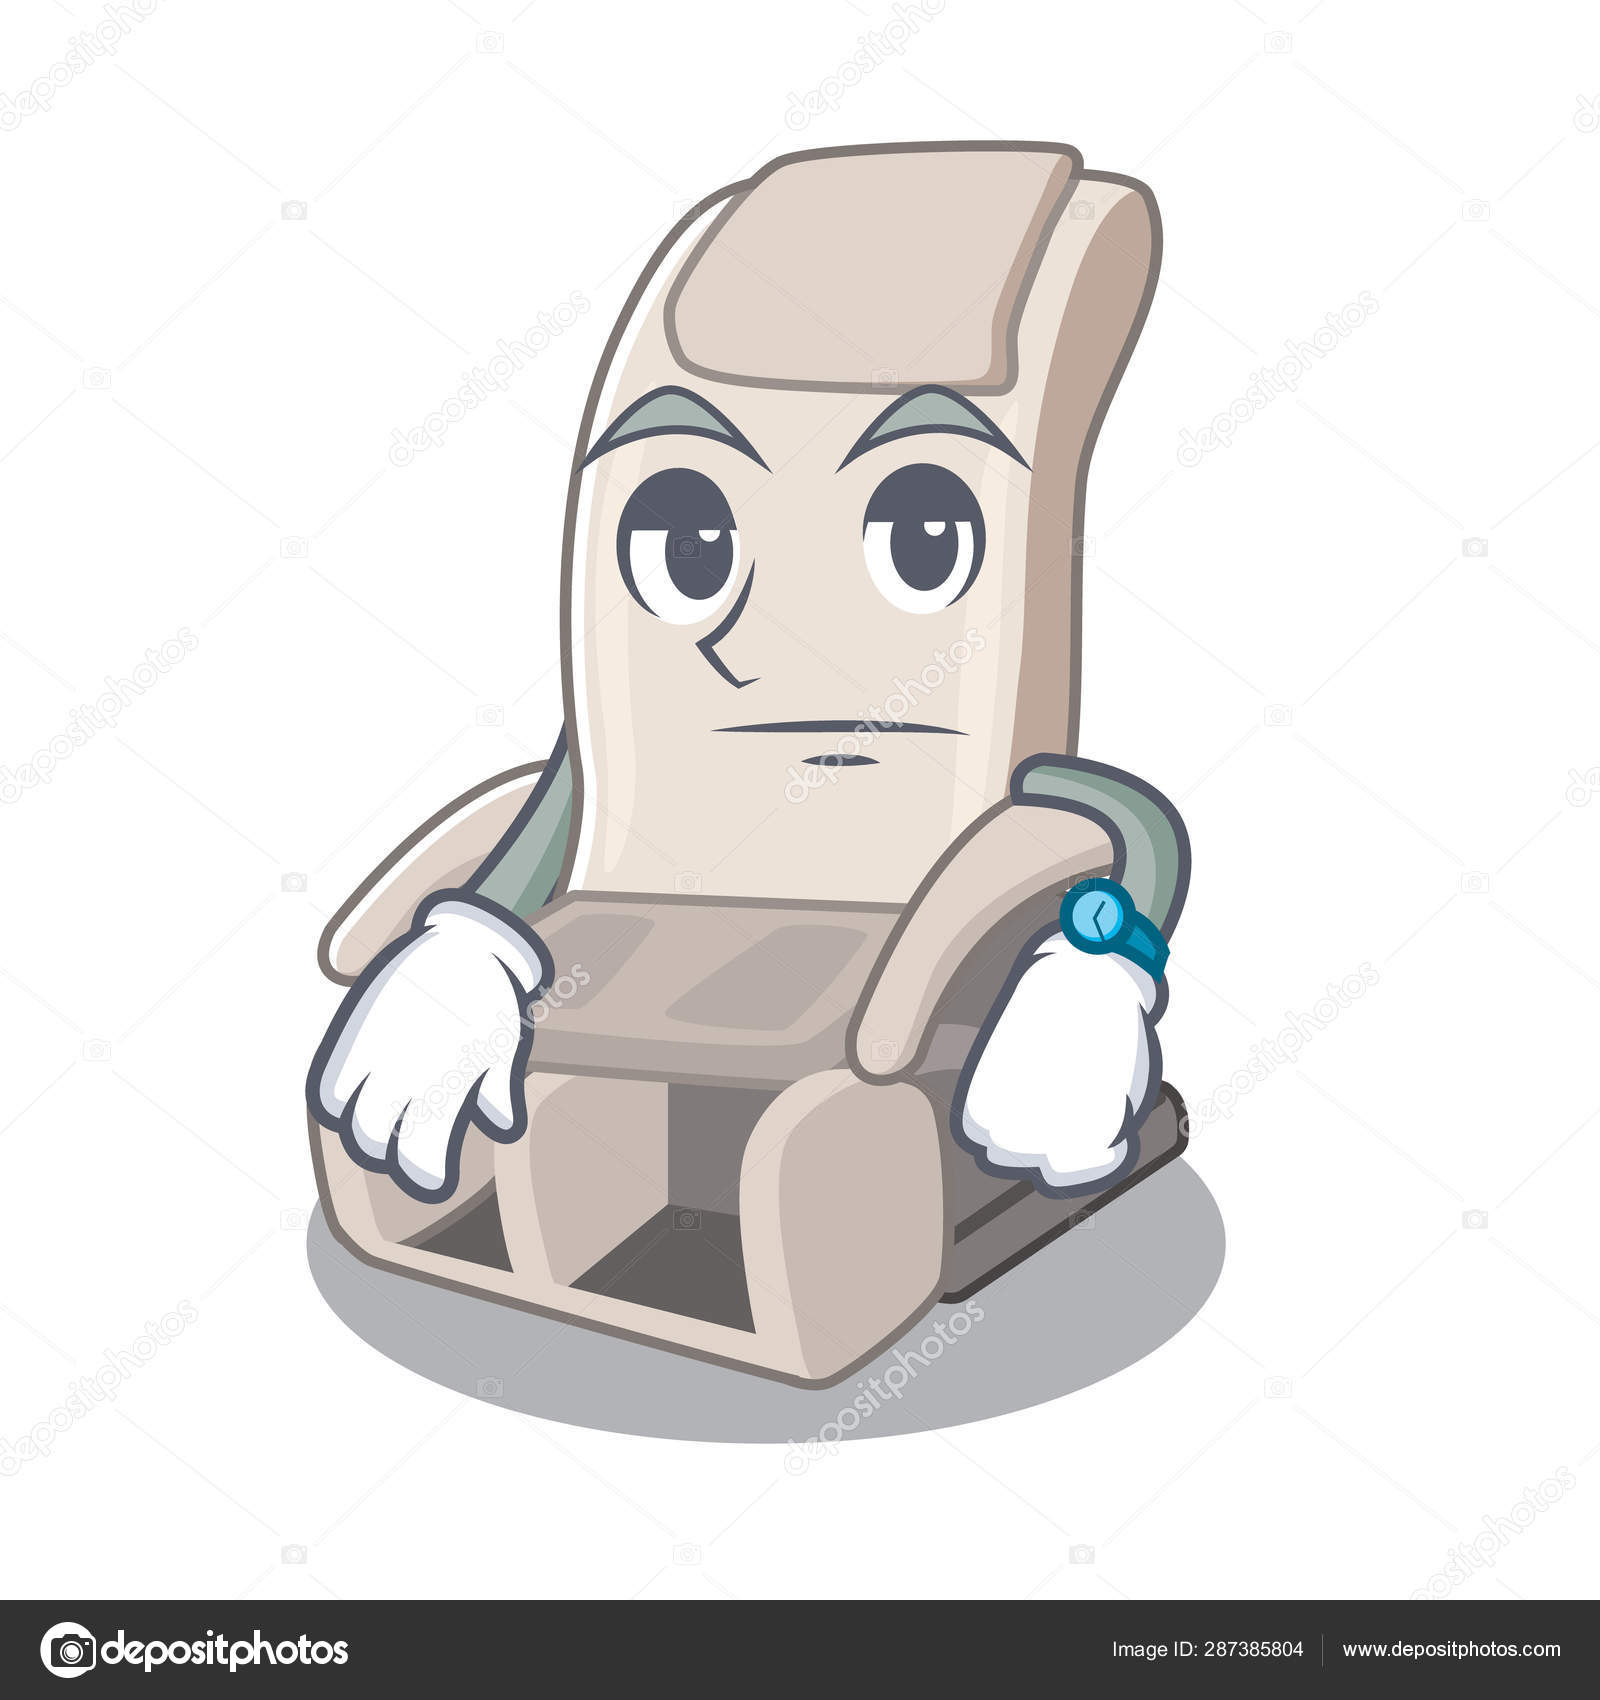 Waiting Toy Massage Chair In Cartoon Shape Stock Vector